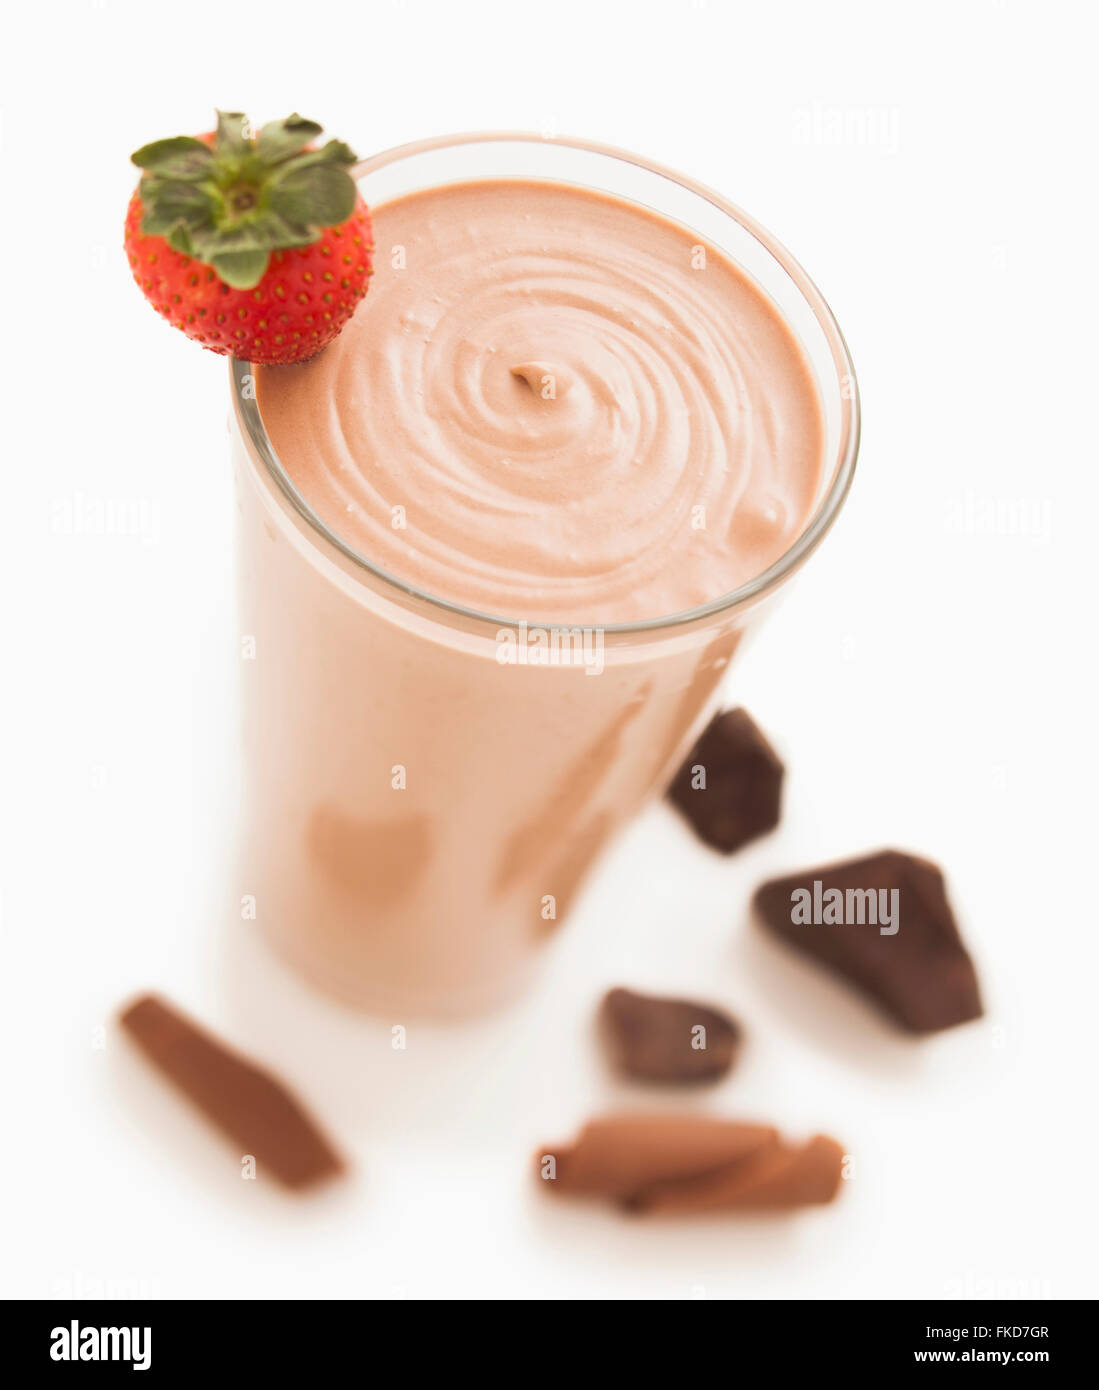 Chocolate smoothie decorated with strawberry and pieces of chocolate Stock Photo